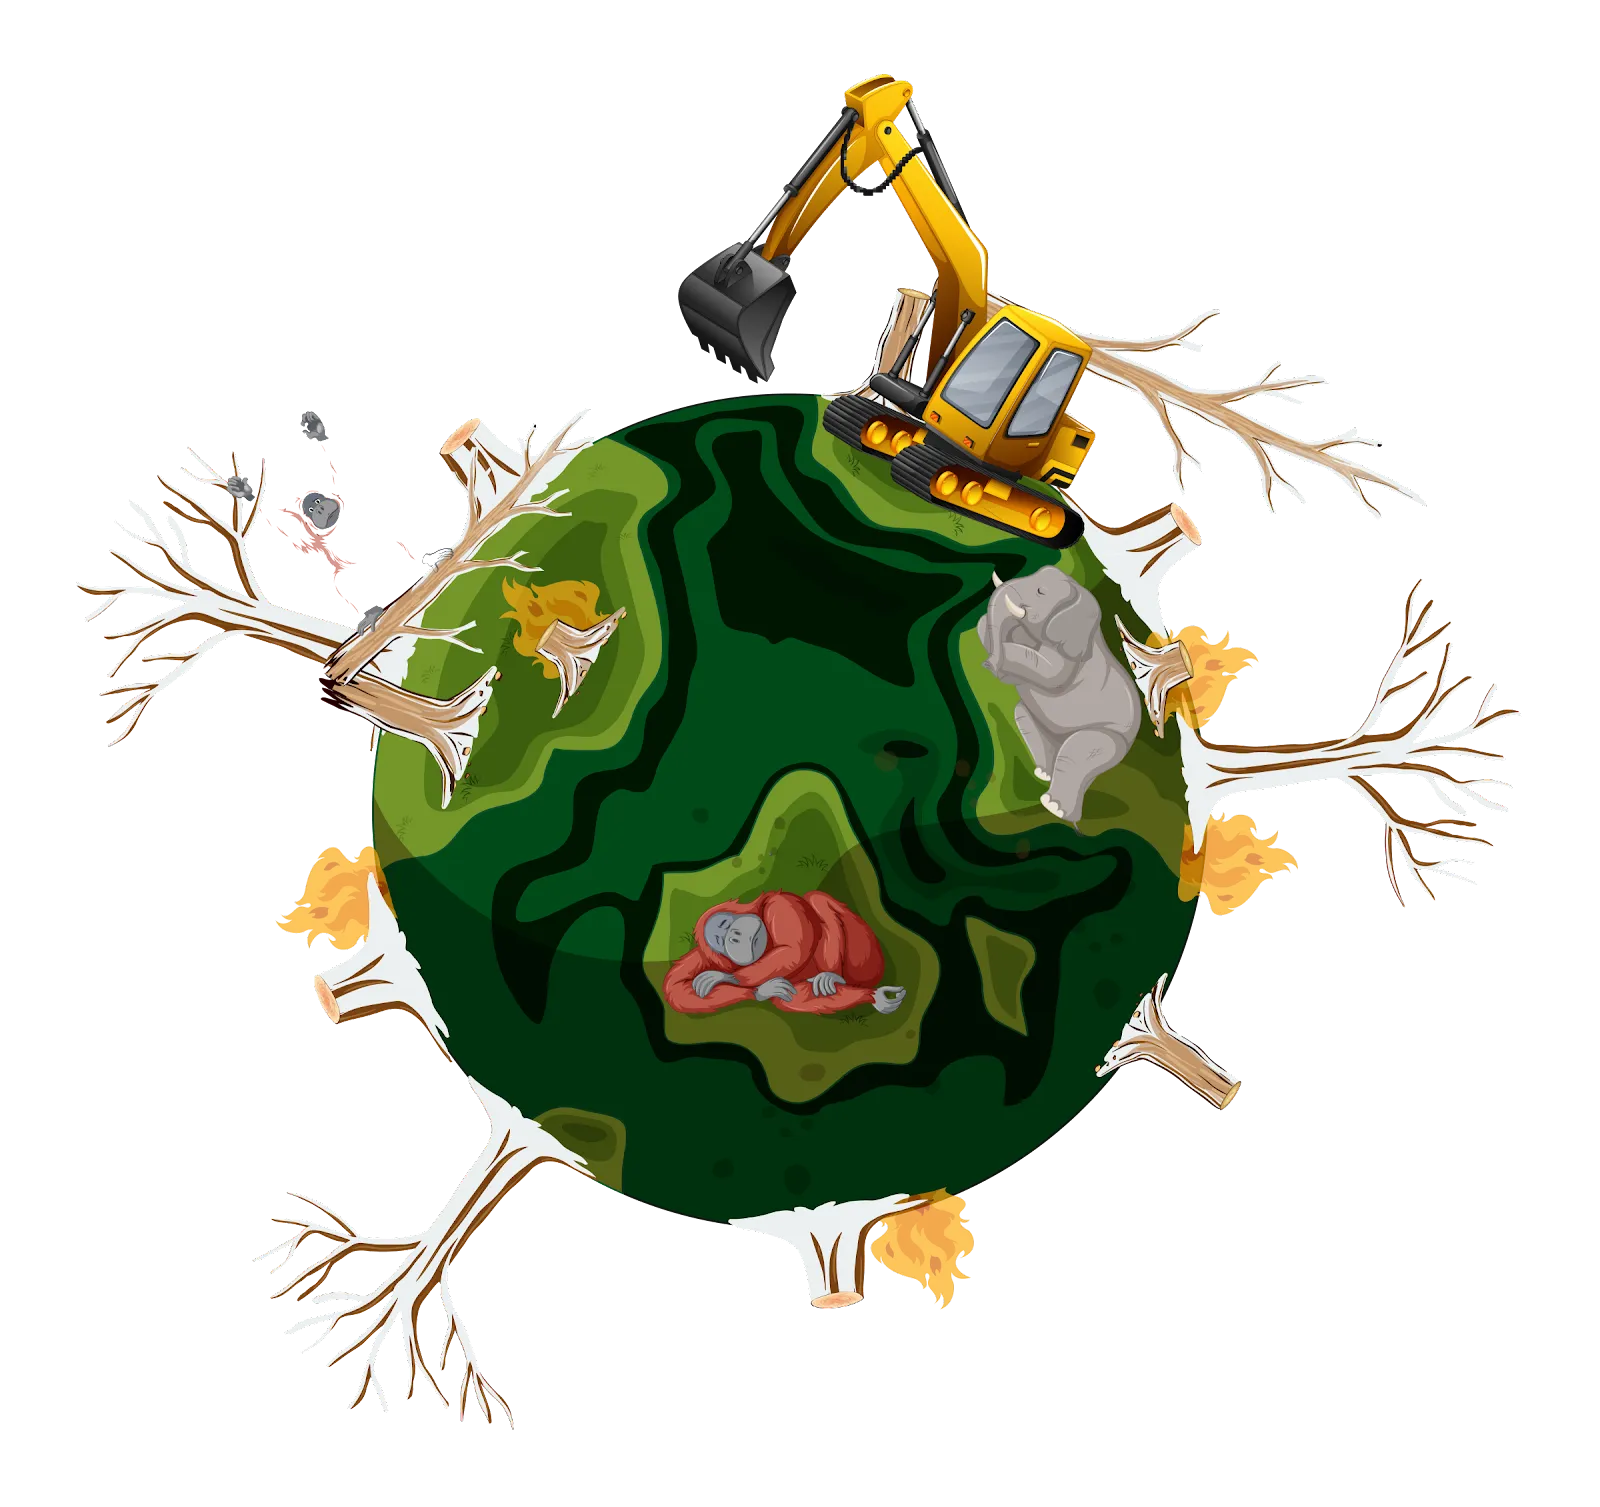 alt="An image titled "Deforestation" showing a globe with trees being cut down along each edge. A crane is positioned on top of the globe, symbolizing human intervention. Animals around the globe are depicted suffering from anxiety due to deforestation, highlighting the negative impact of deforestation on wildlife."